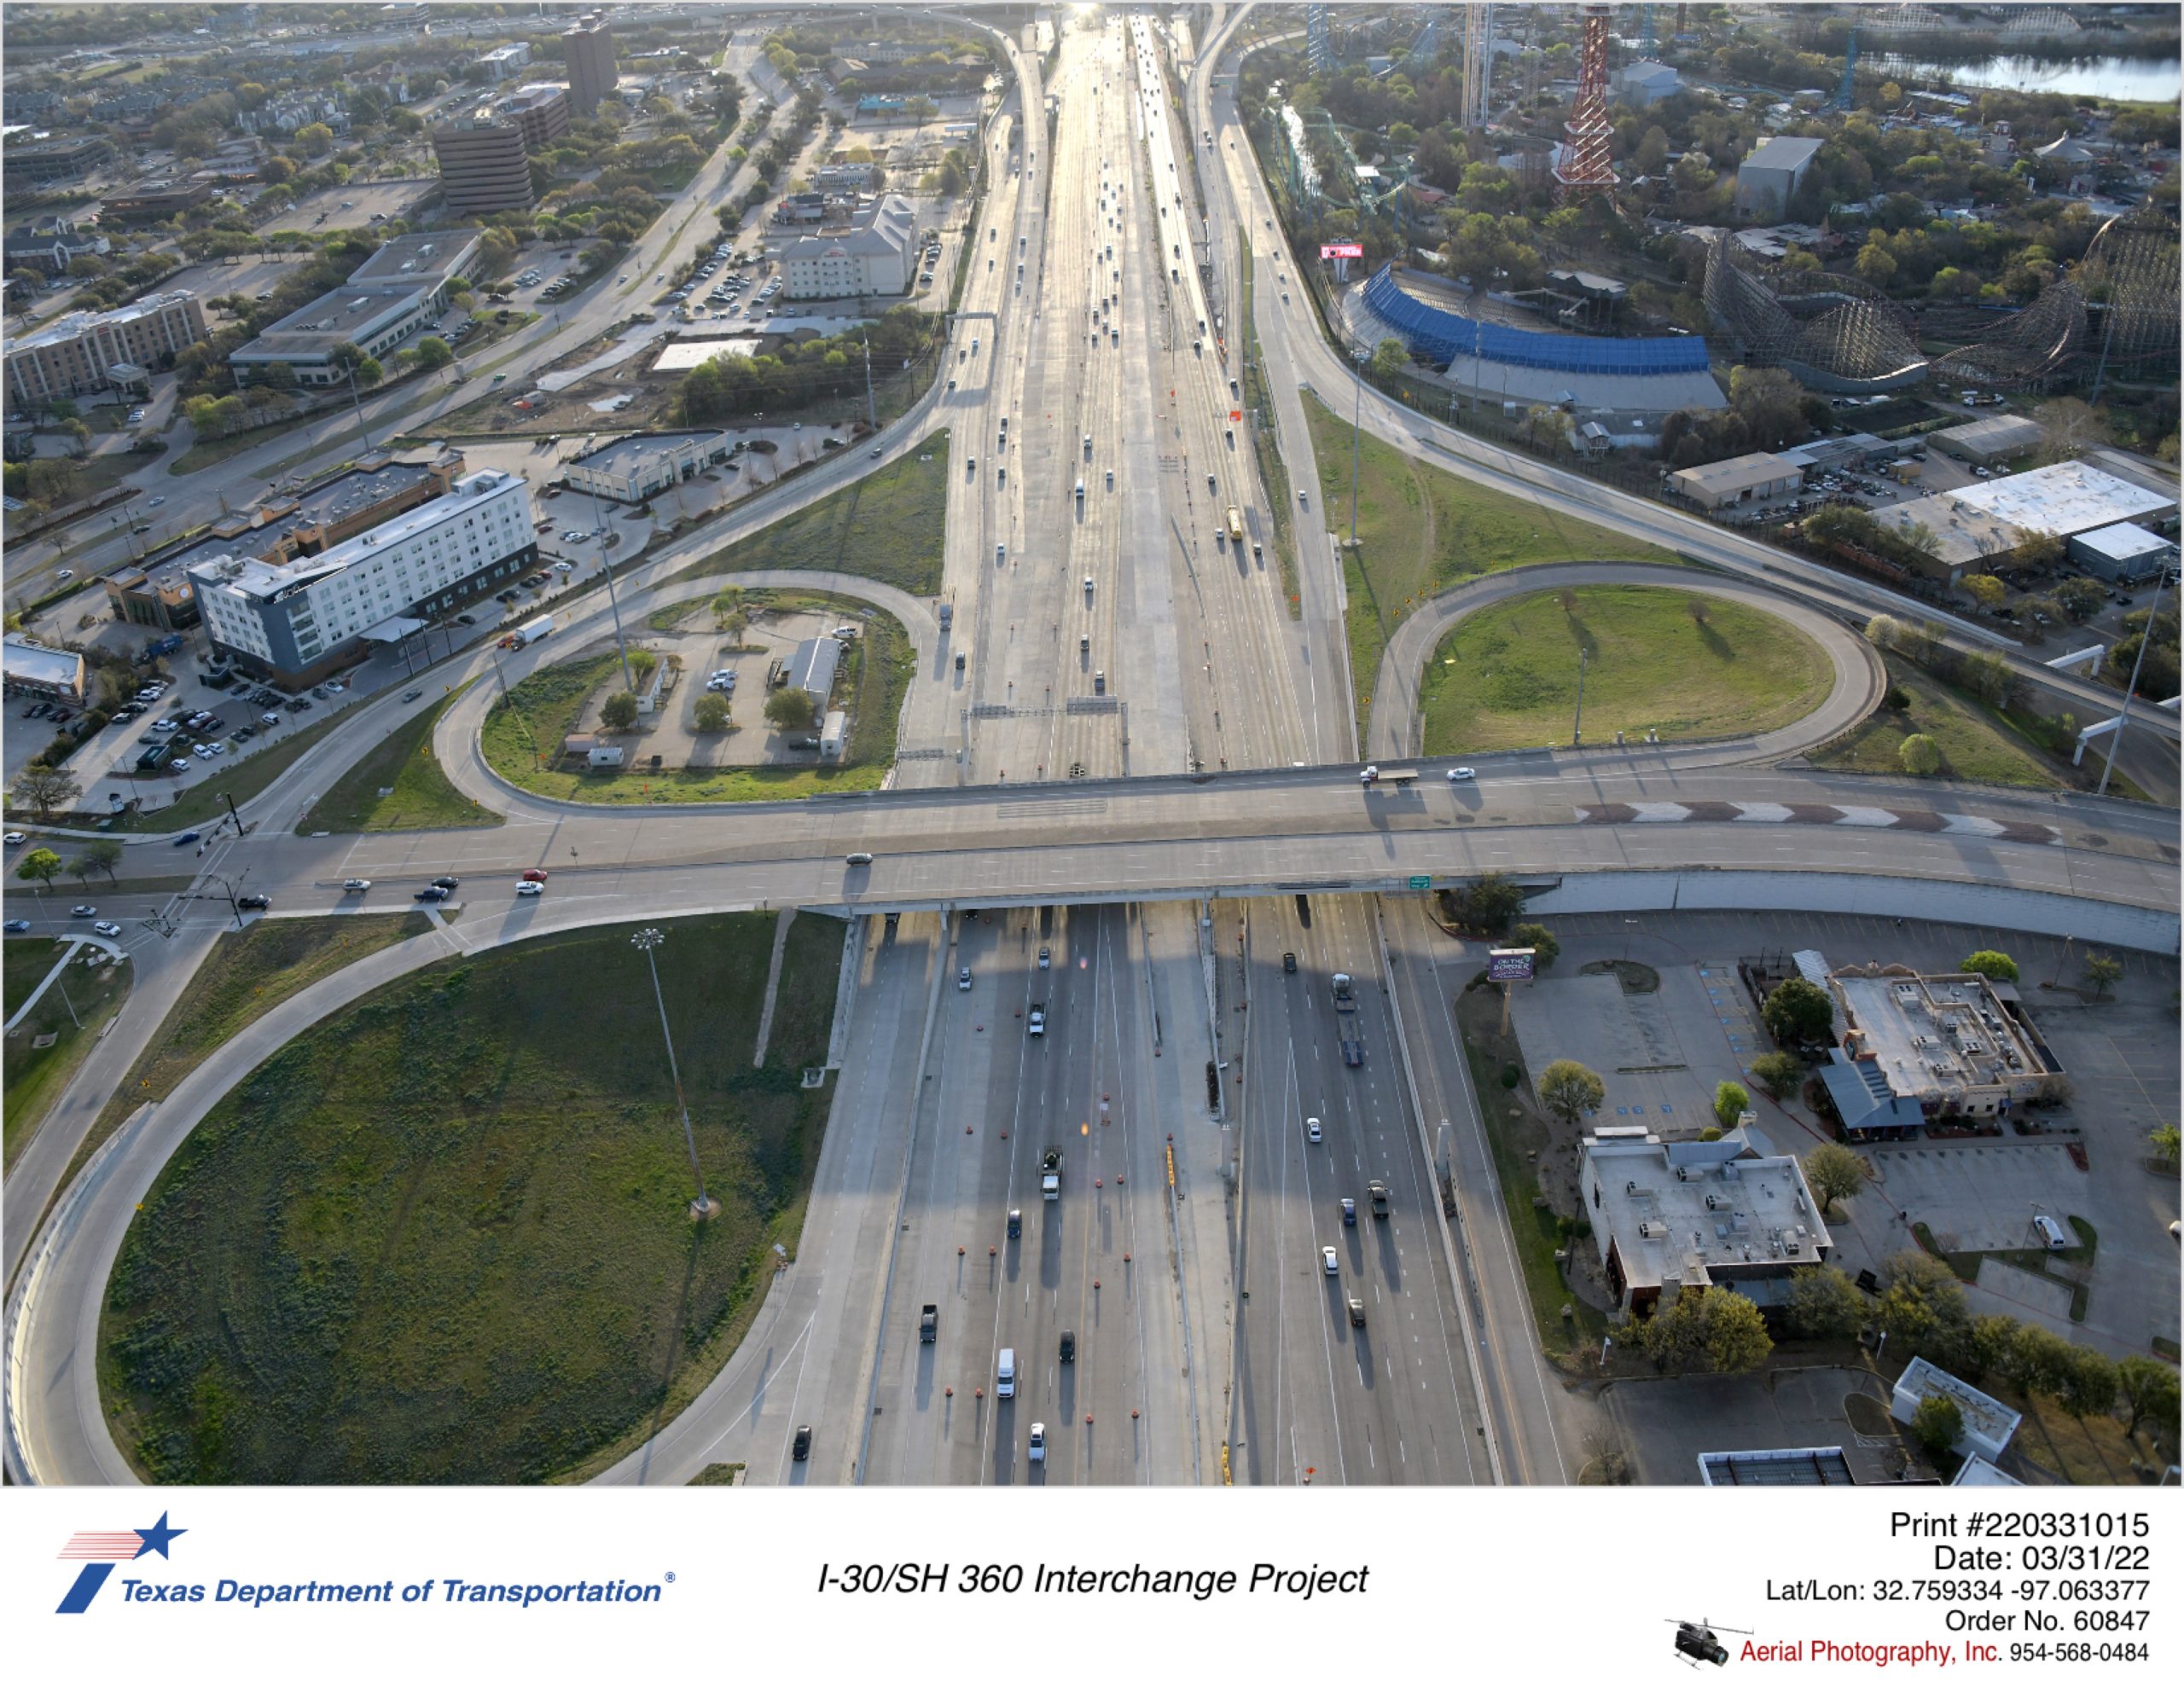 I-30 looking west with Ballpark Way interchange in foreground.